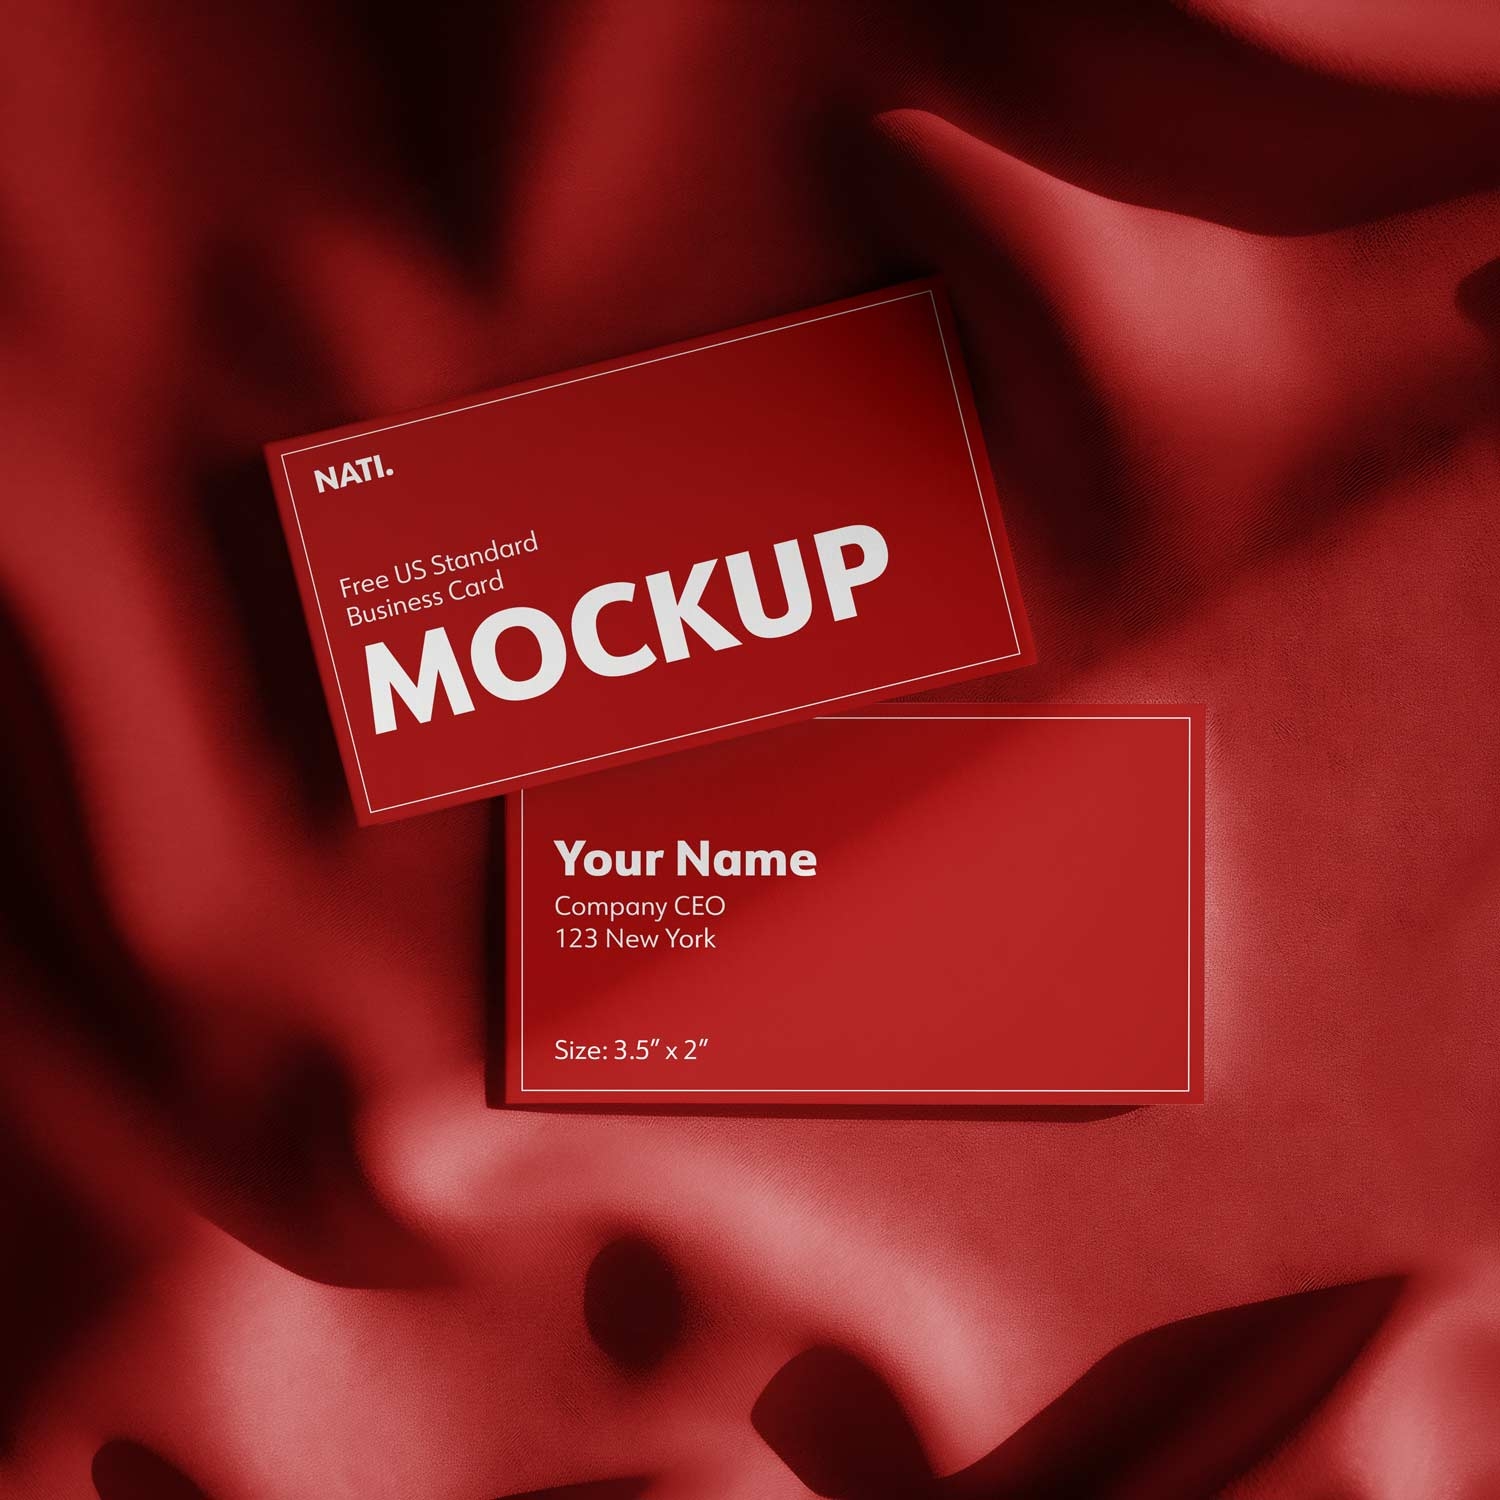 free mockup of a red double sided business card (standard US size) lying on a red cloth background